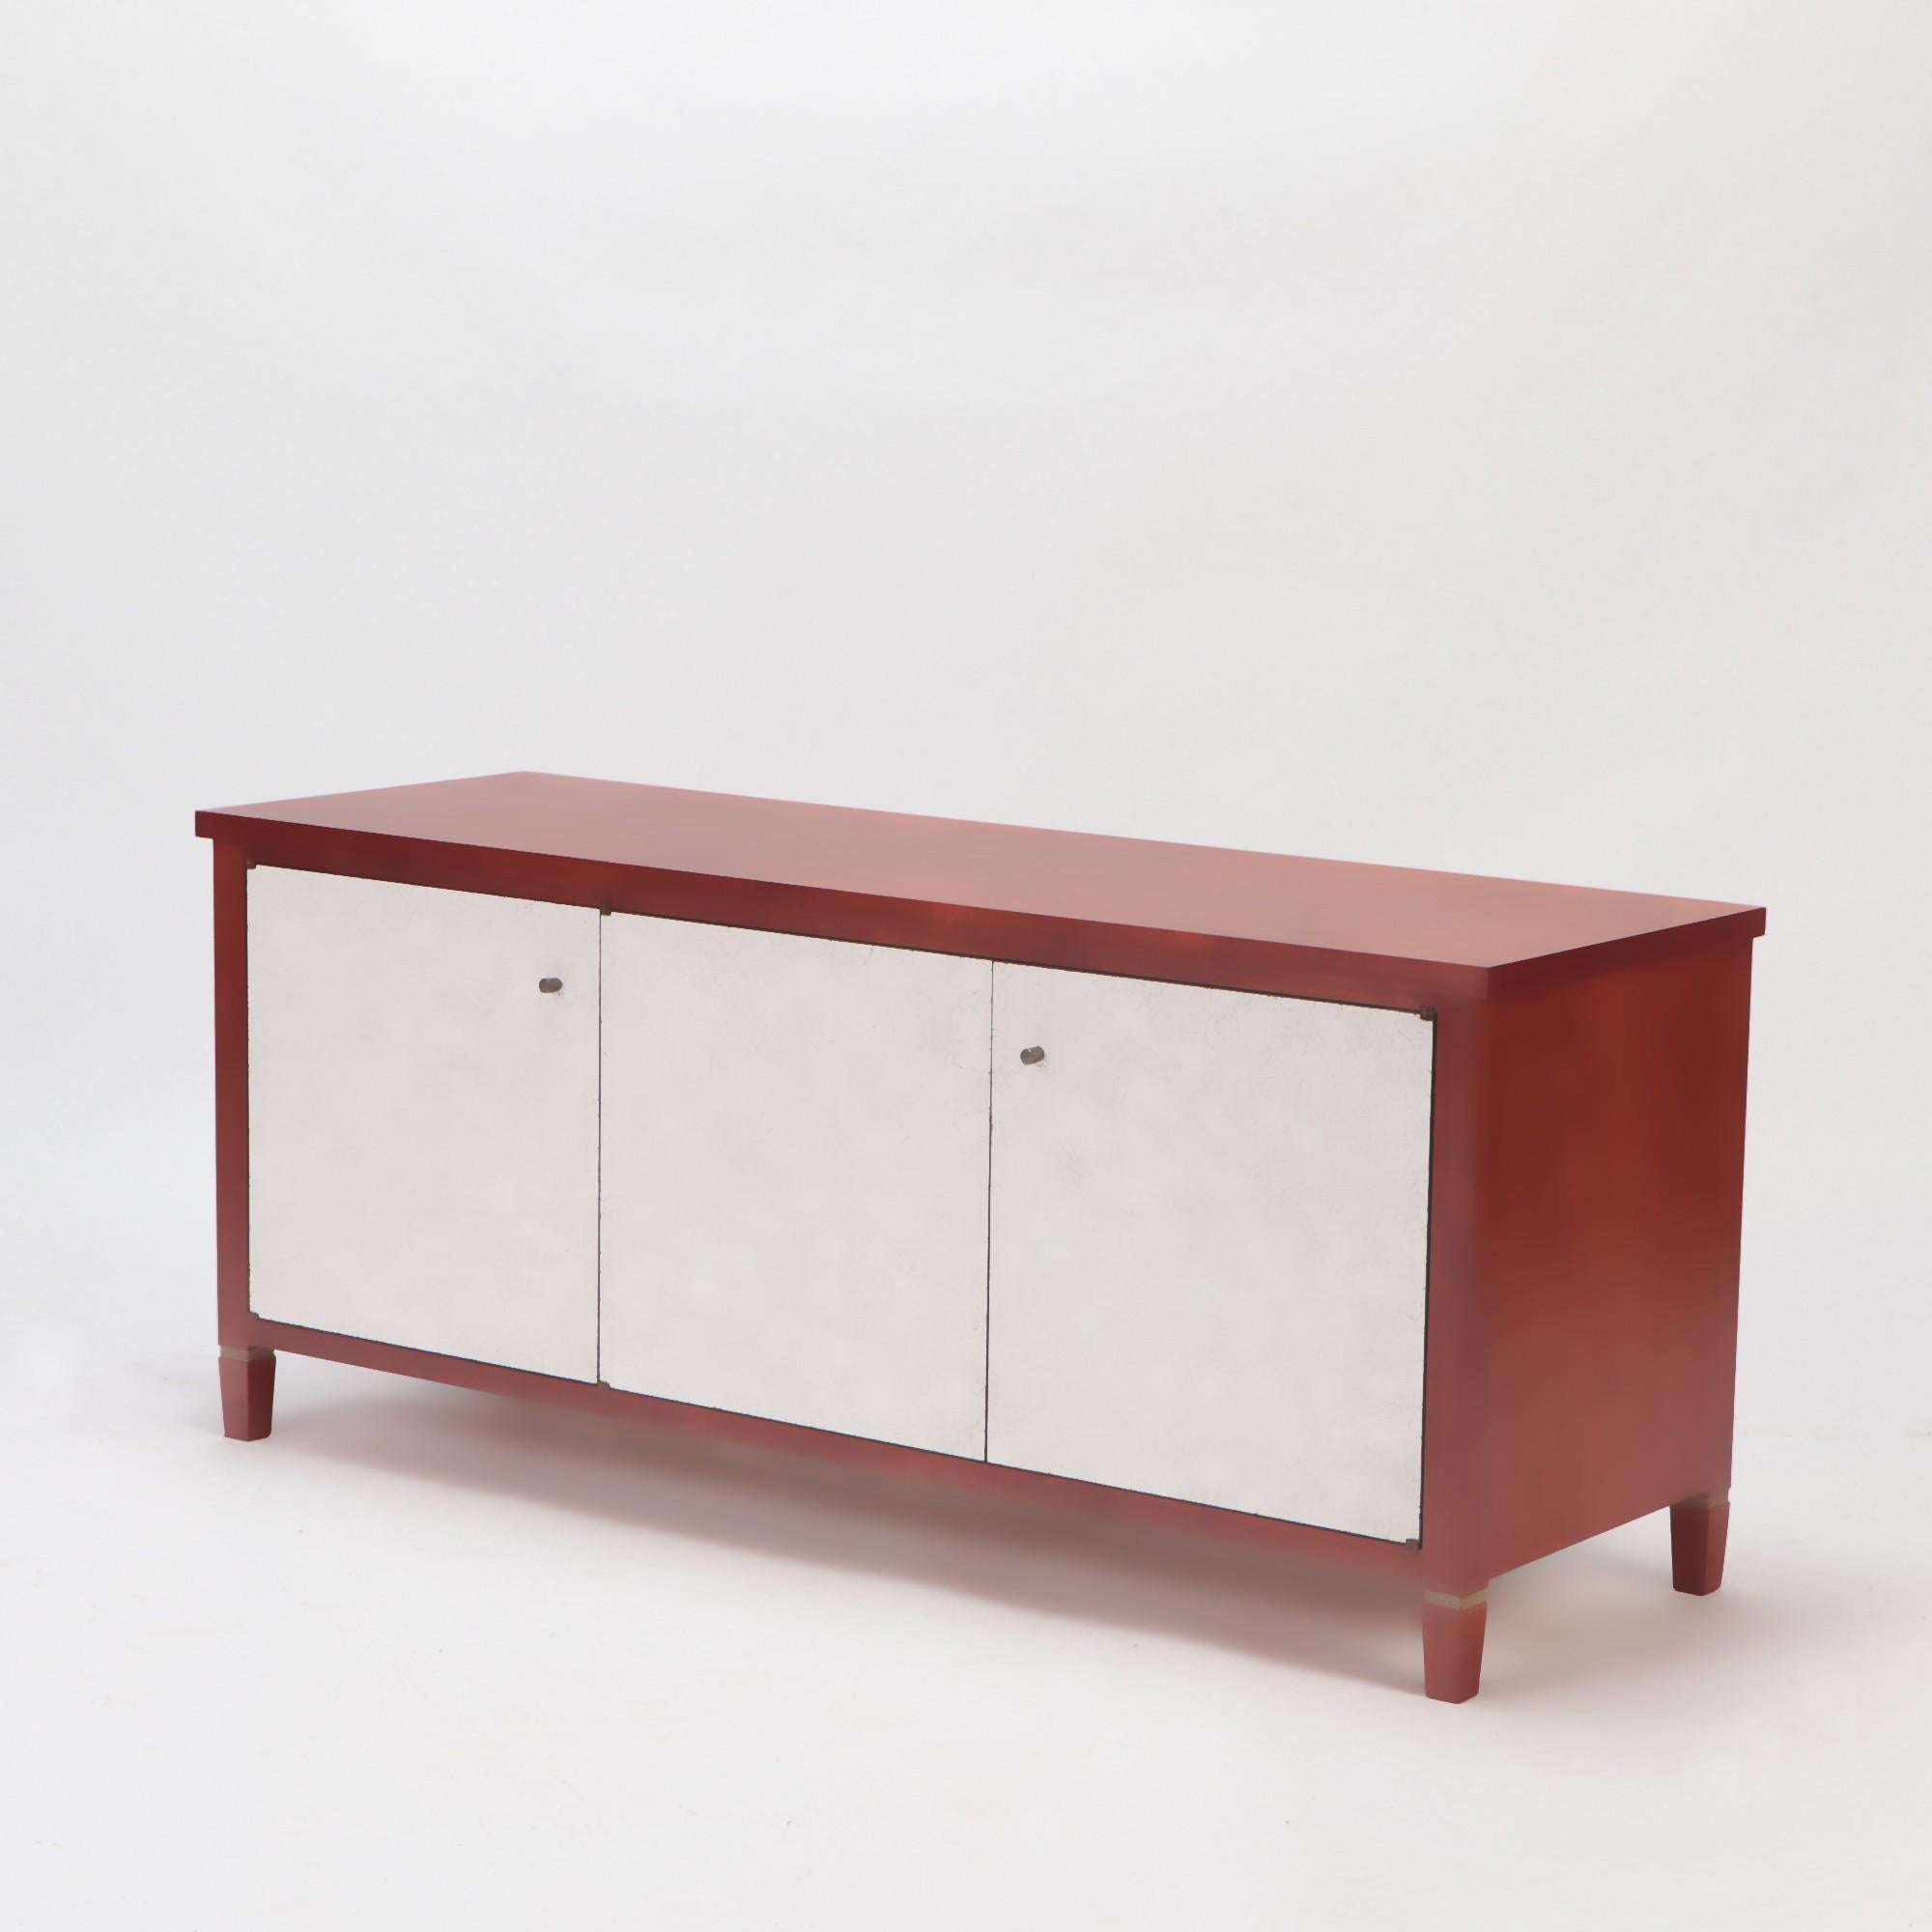 Wheeler Credenza. Made of solid mahogany.
Coquille D'Oeuf (Eggshell), Shagreen and solid brass fittings. 2019.